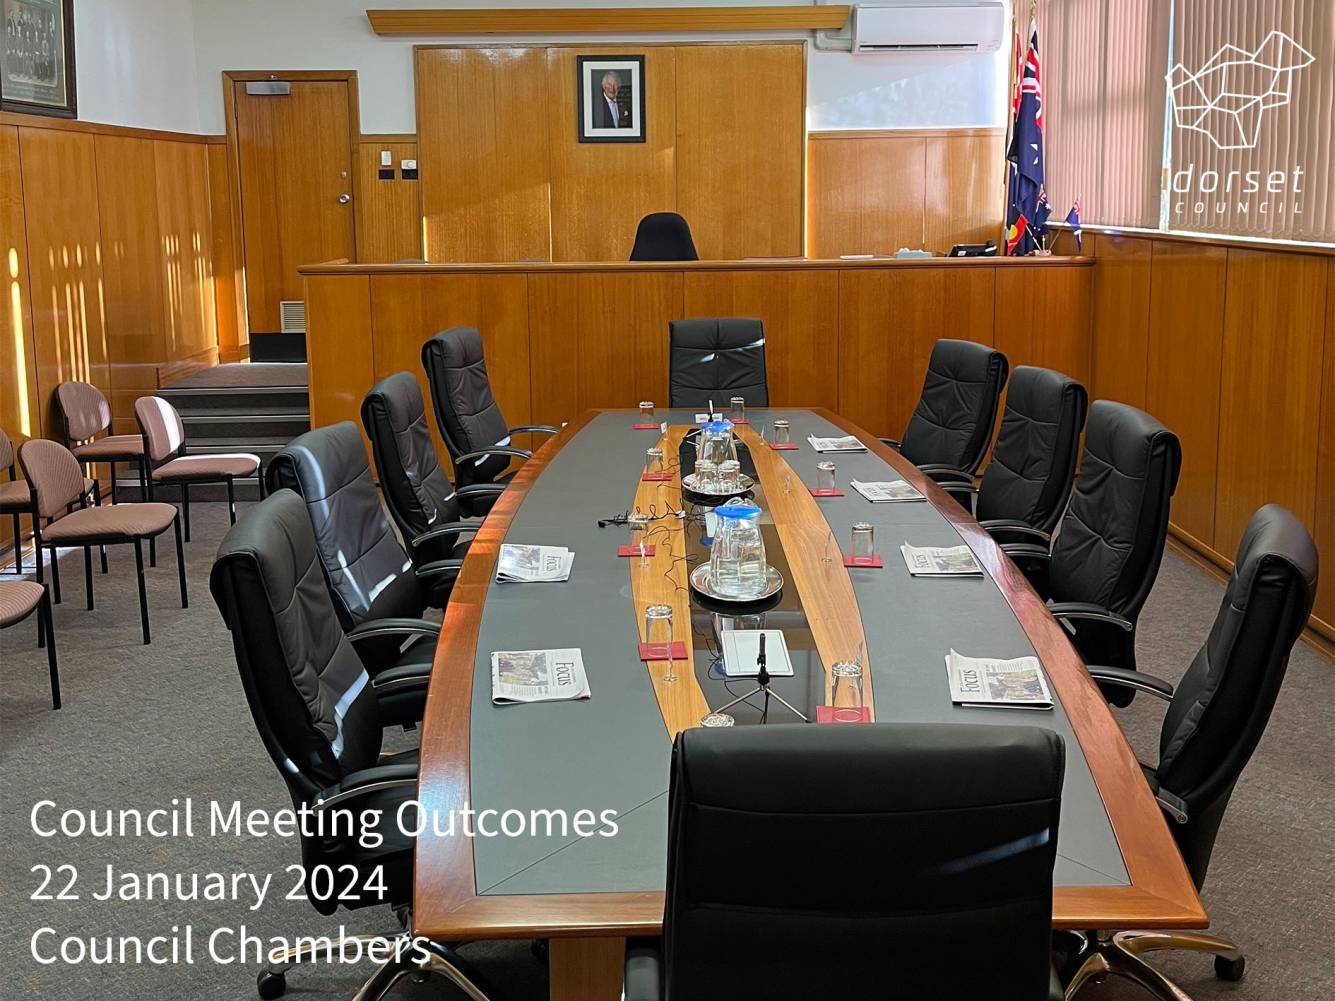 Briefing of Decisions | 22 January 2024 Council Meeting